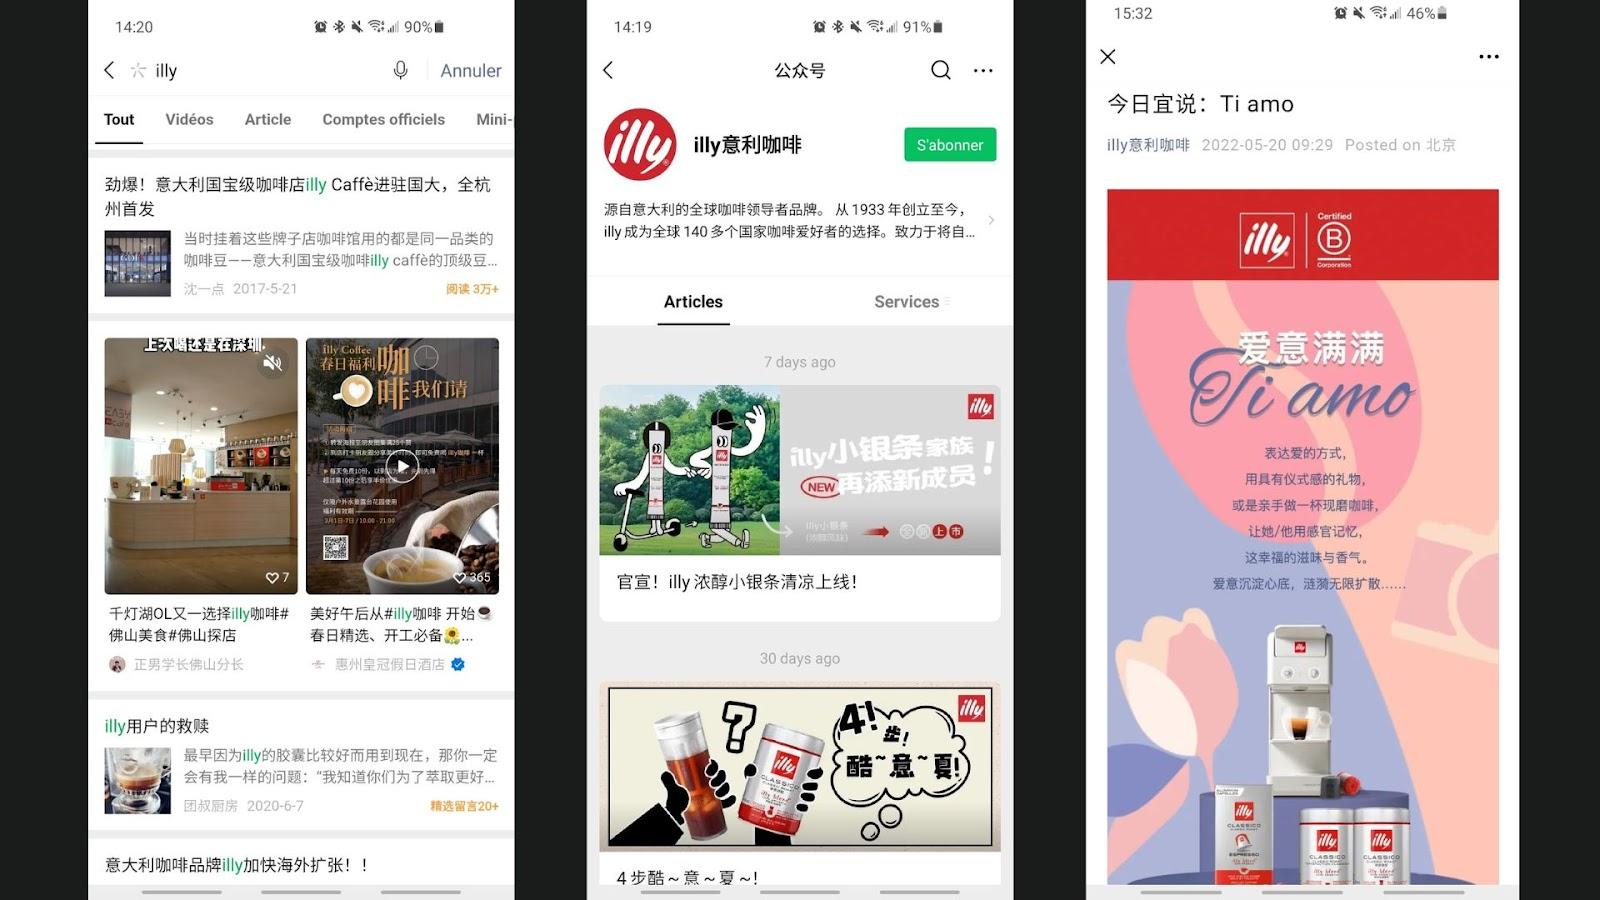 Interface of the WeChat application